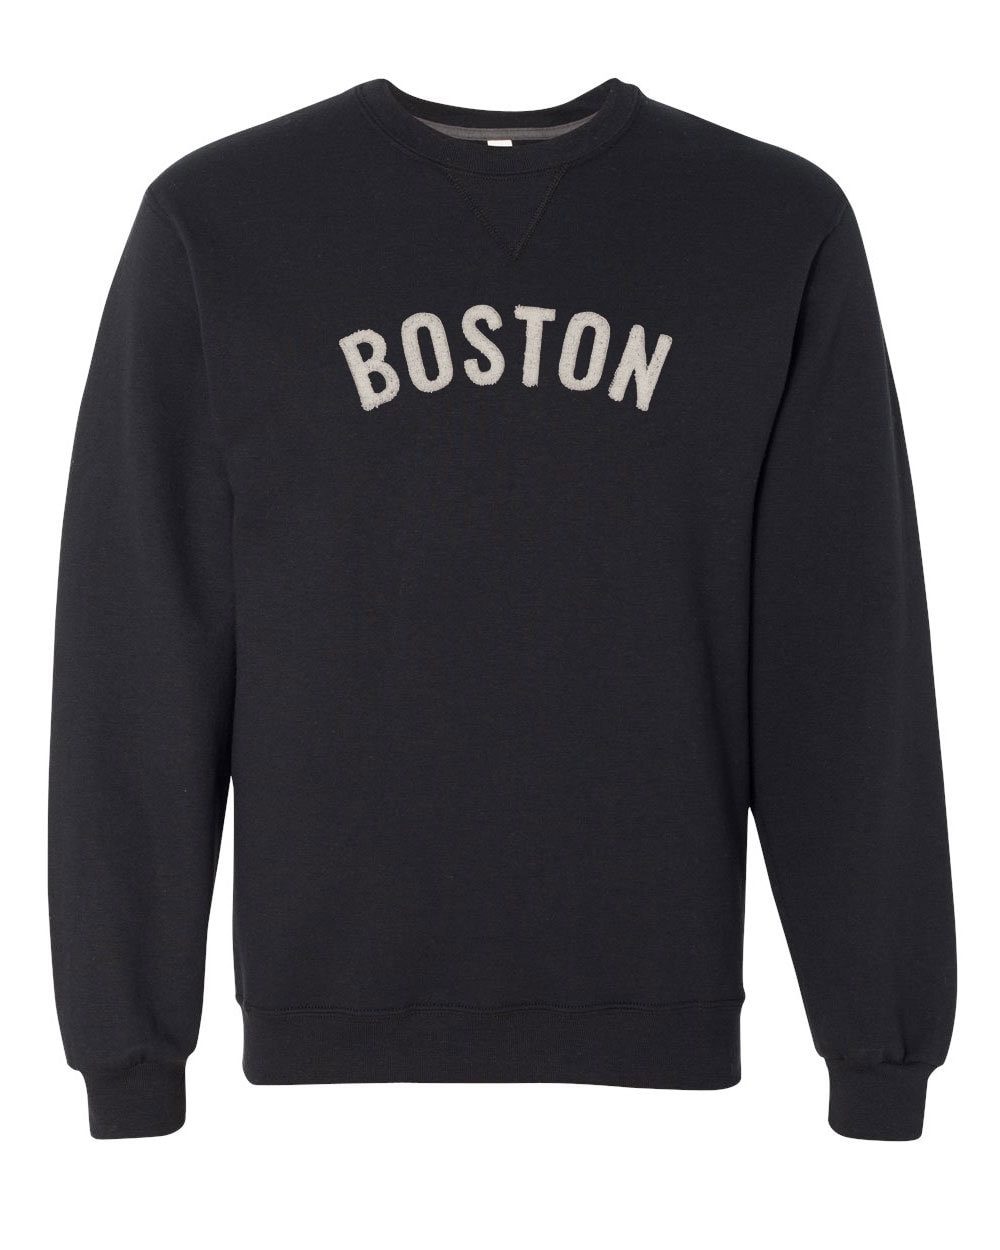 Boston Crew Neck Sweatshirt SF72R with Chenille Letters in | Etsy